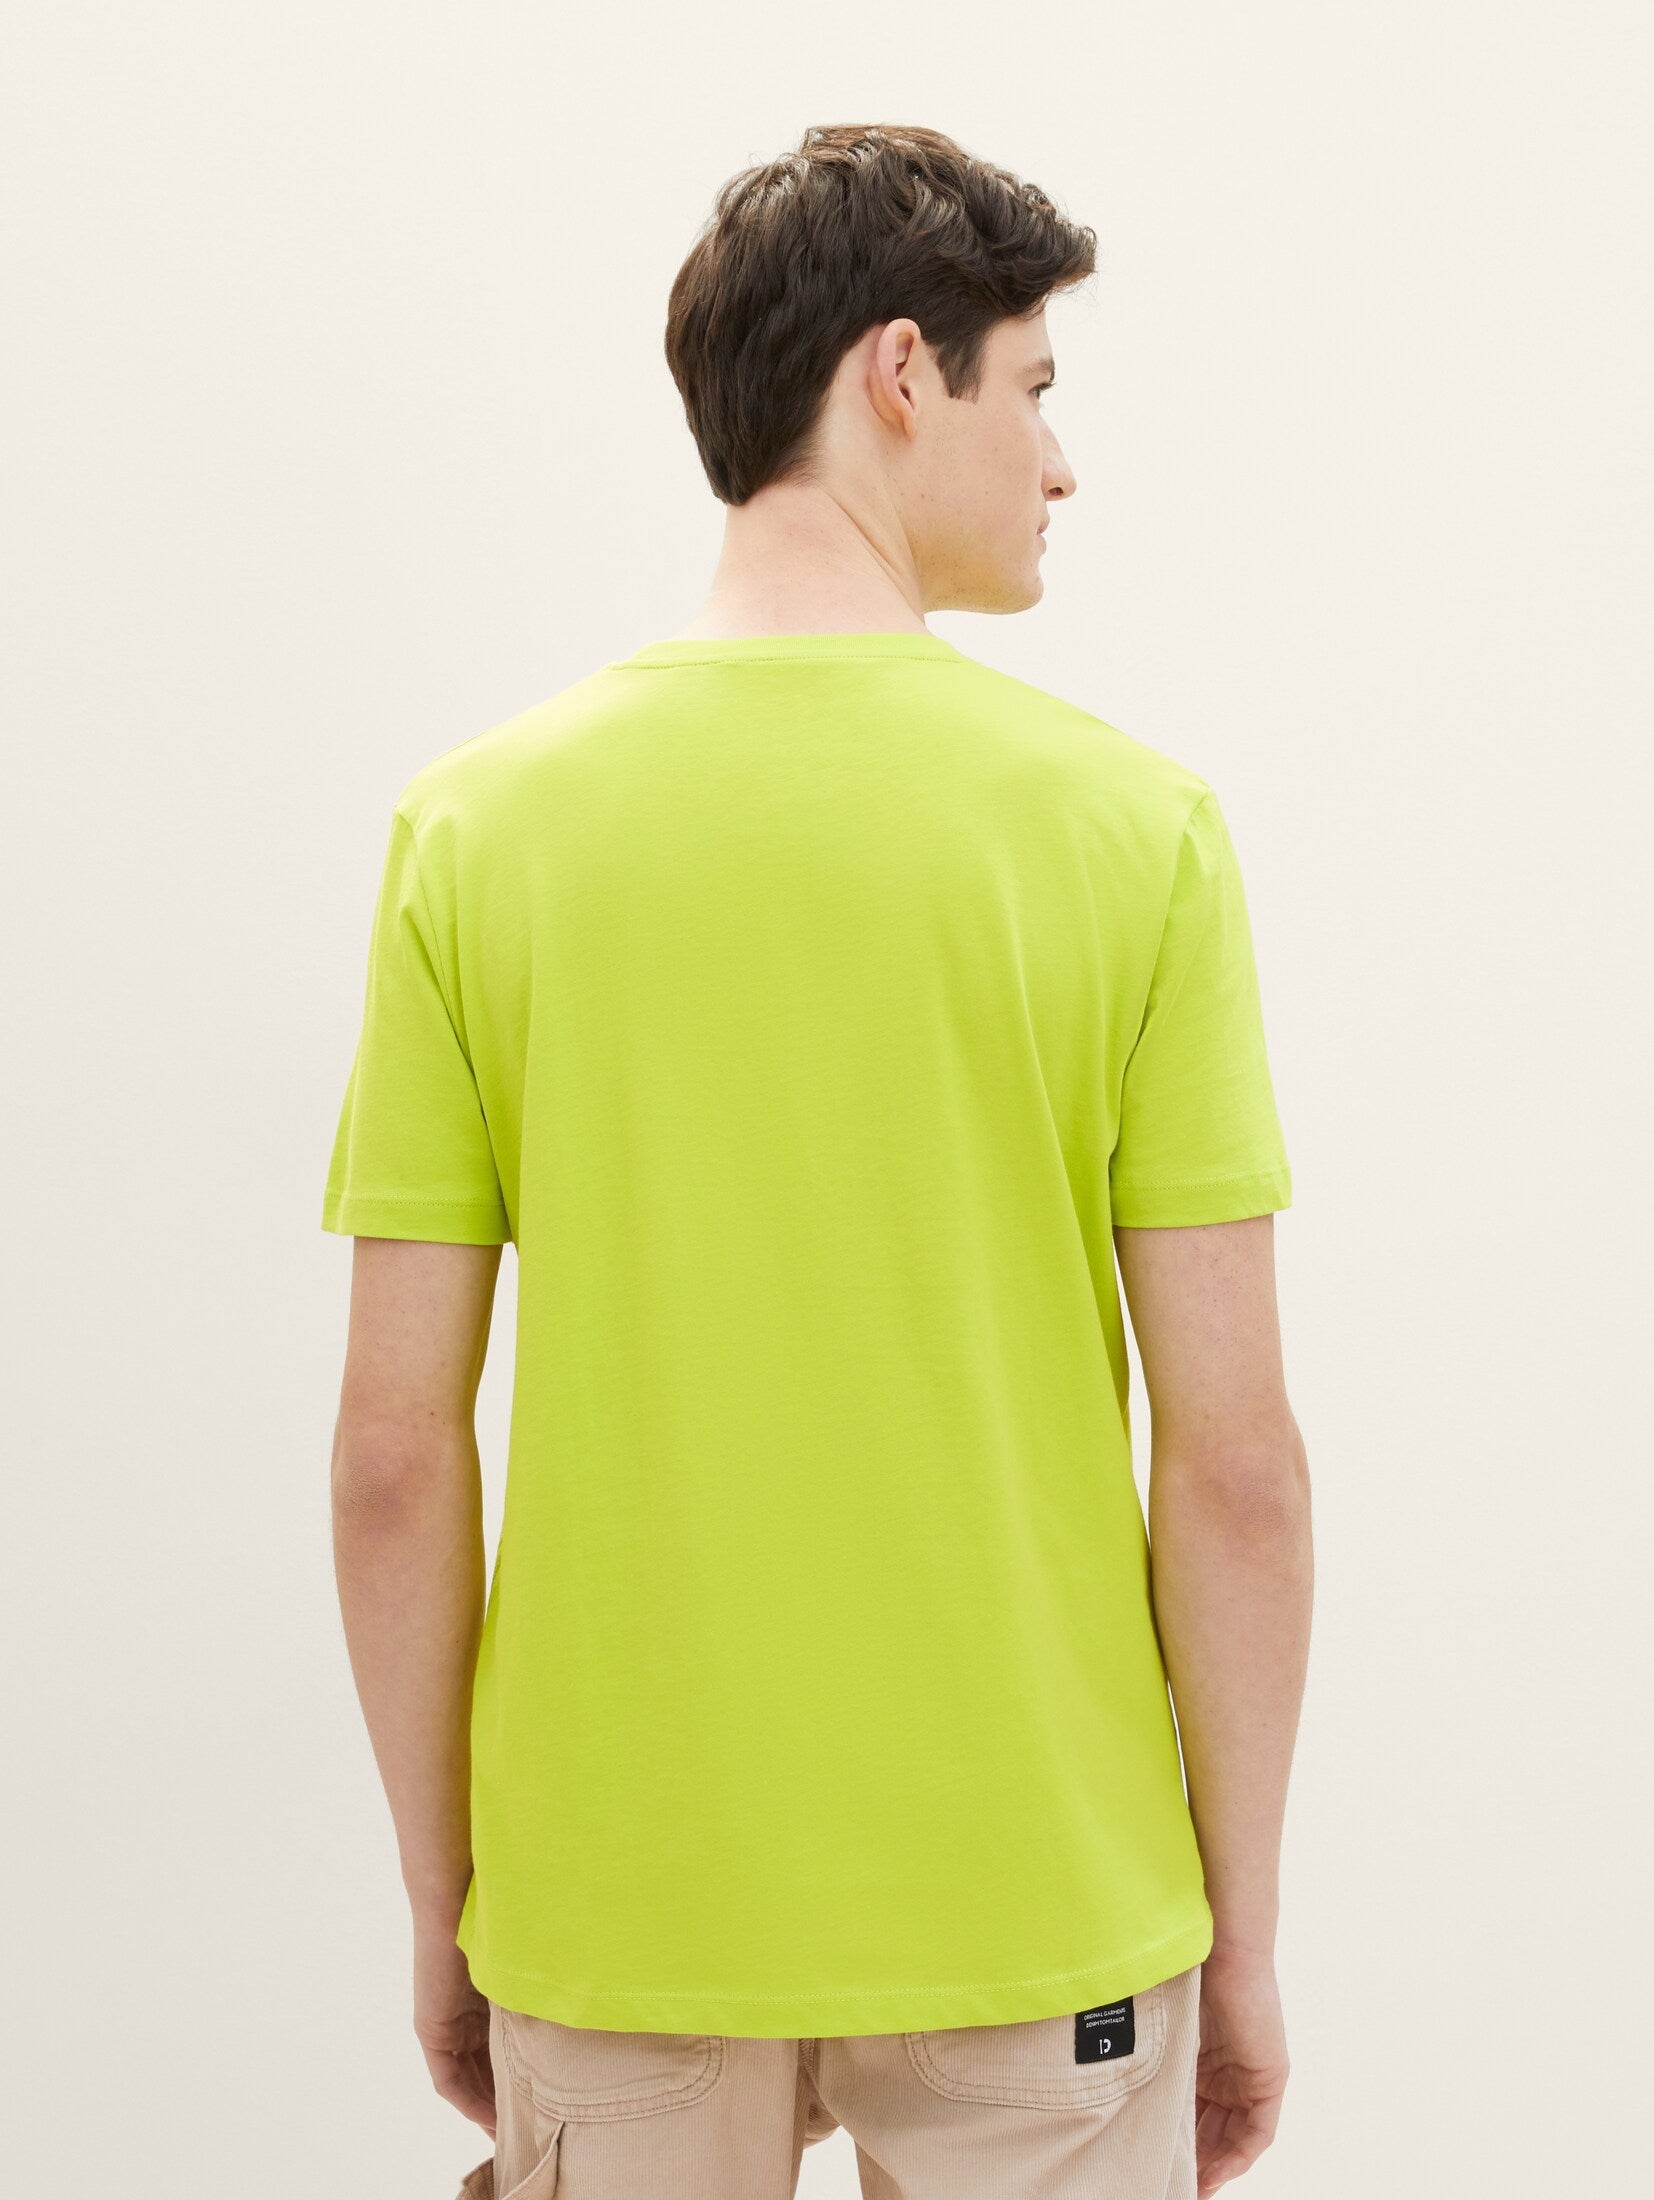 Tom Tailor Juicy Kiwi T-shirt With Front Design